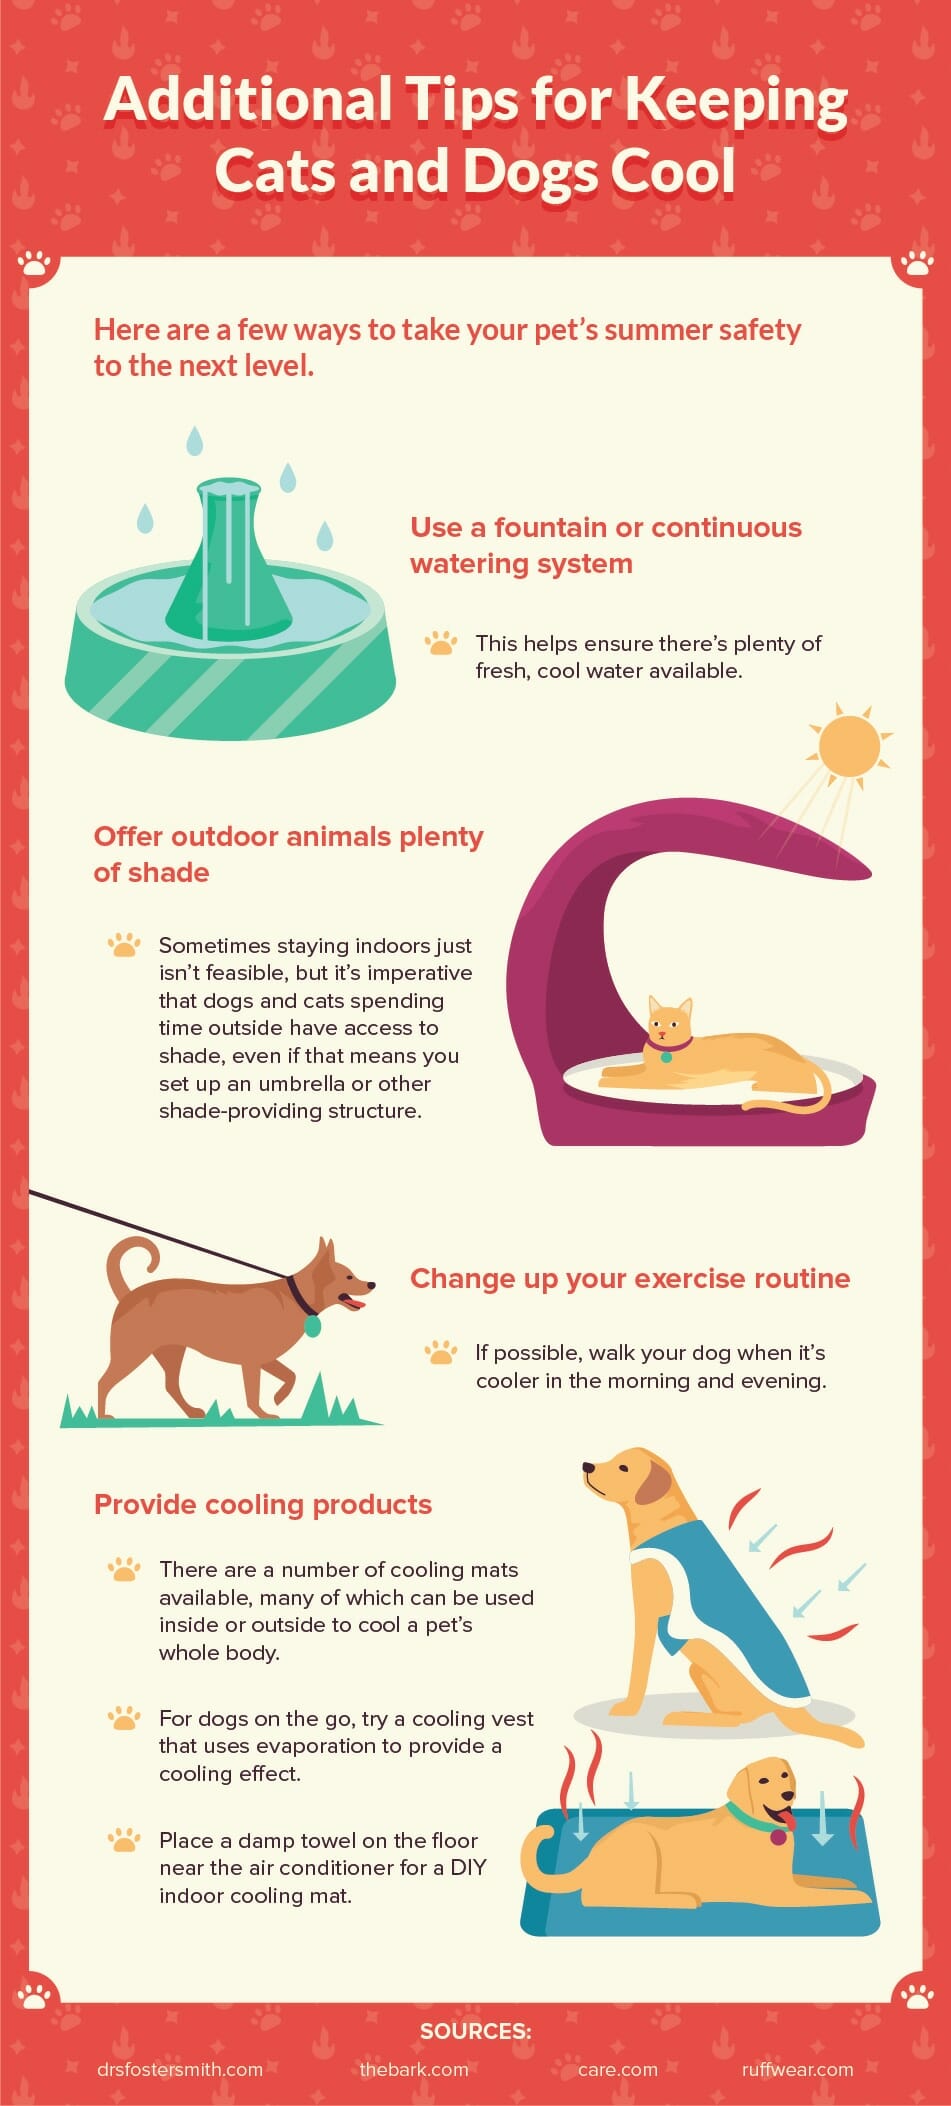 More Tips for Keeping Pets Cool During the Summer